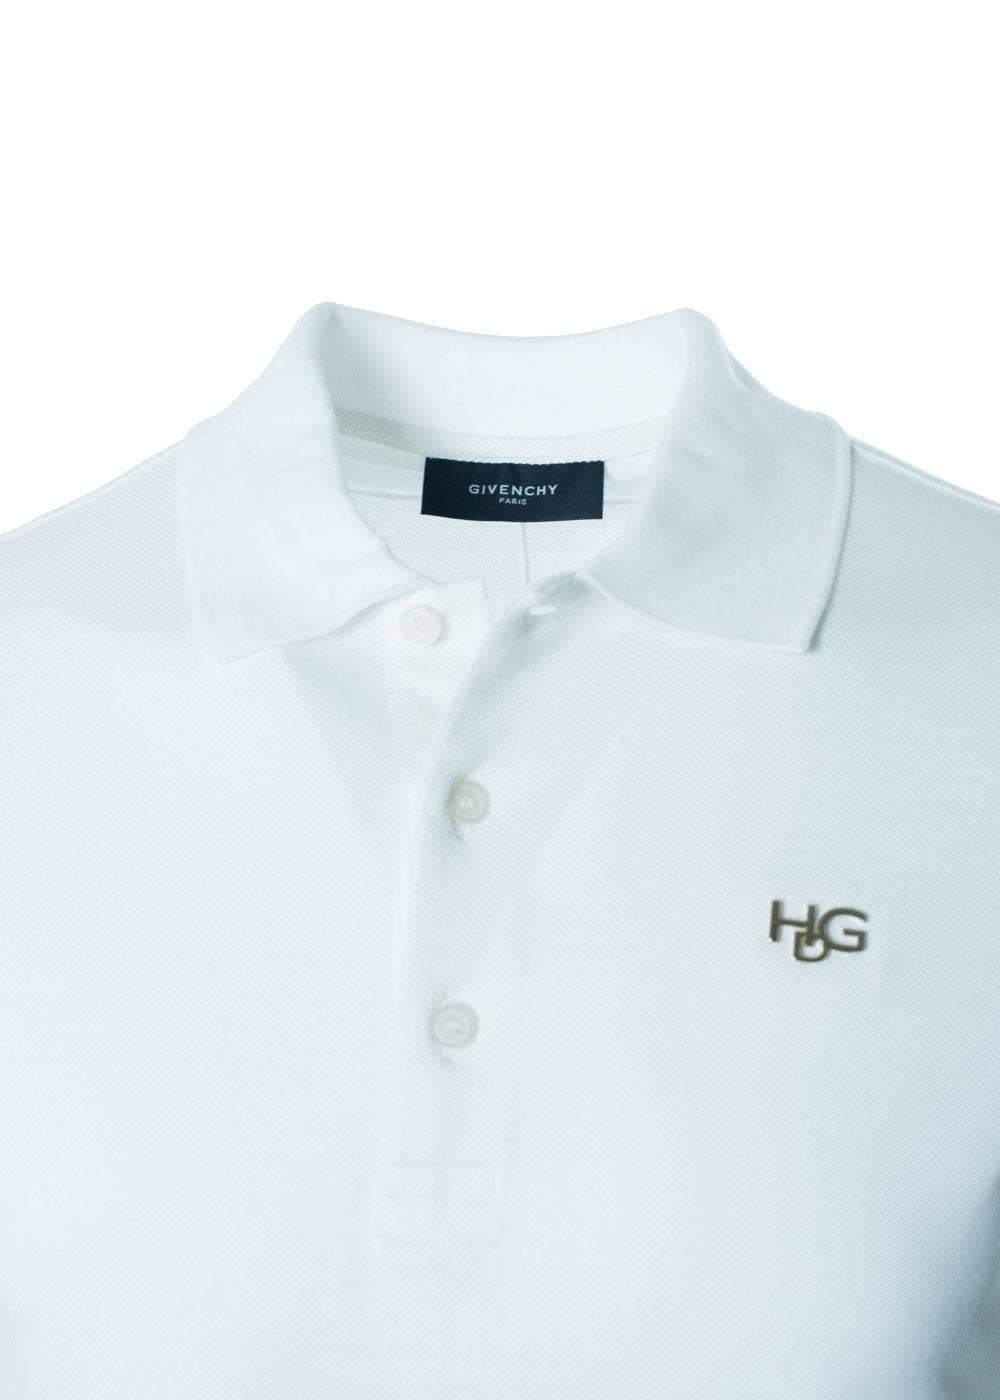 Brand New Givenchy Men's Polo
Original Tags
Retails in Stores & Online for $550
Men's Size XX-Large Fits True to Size

Classic white polo shirt, versatile for any occasion and season especially this hot summer weather. This polo shirt has a silver